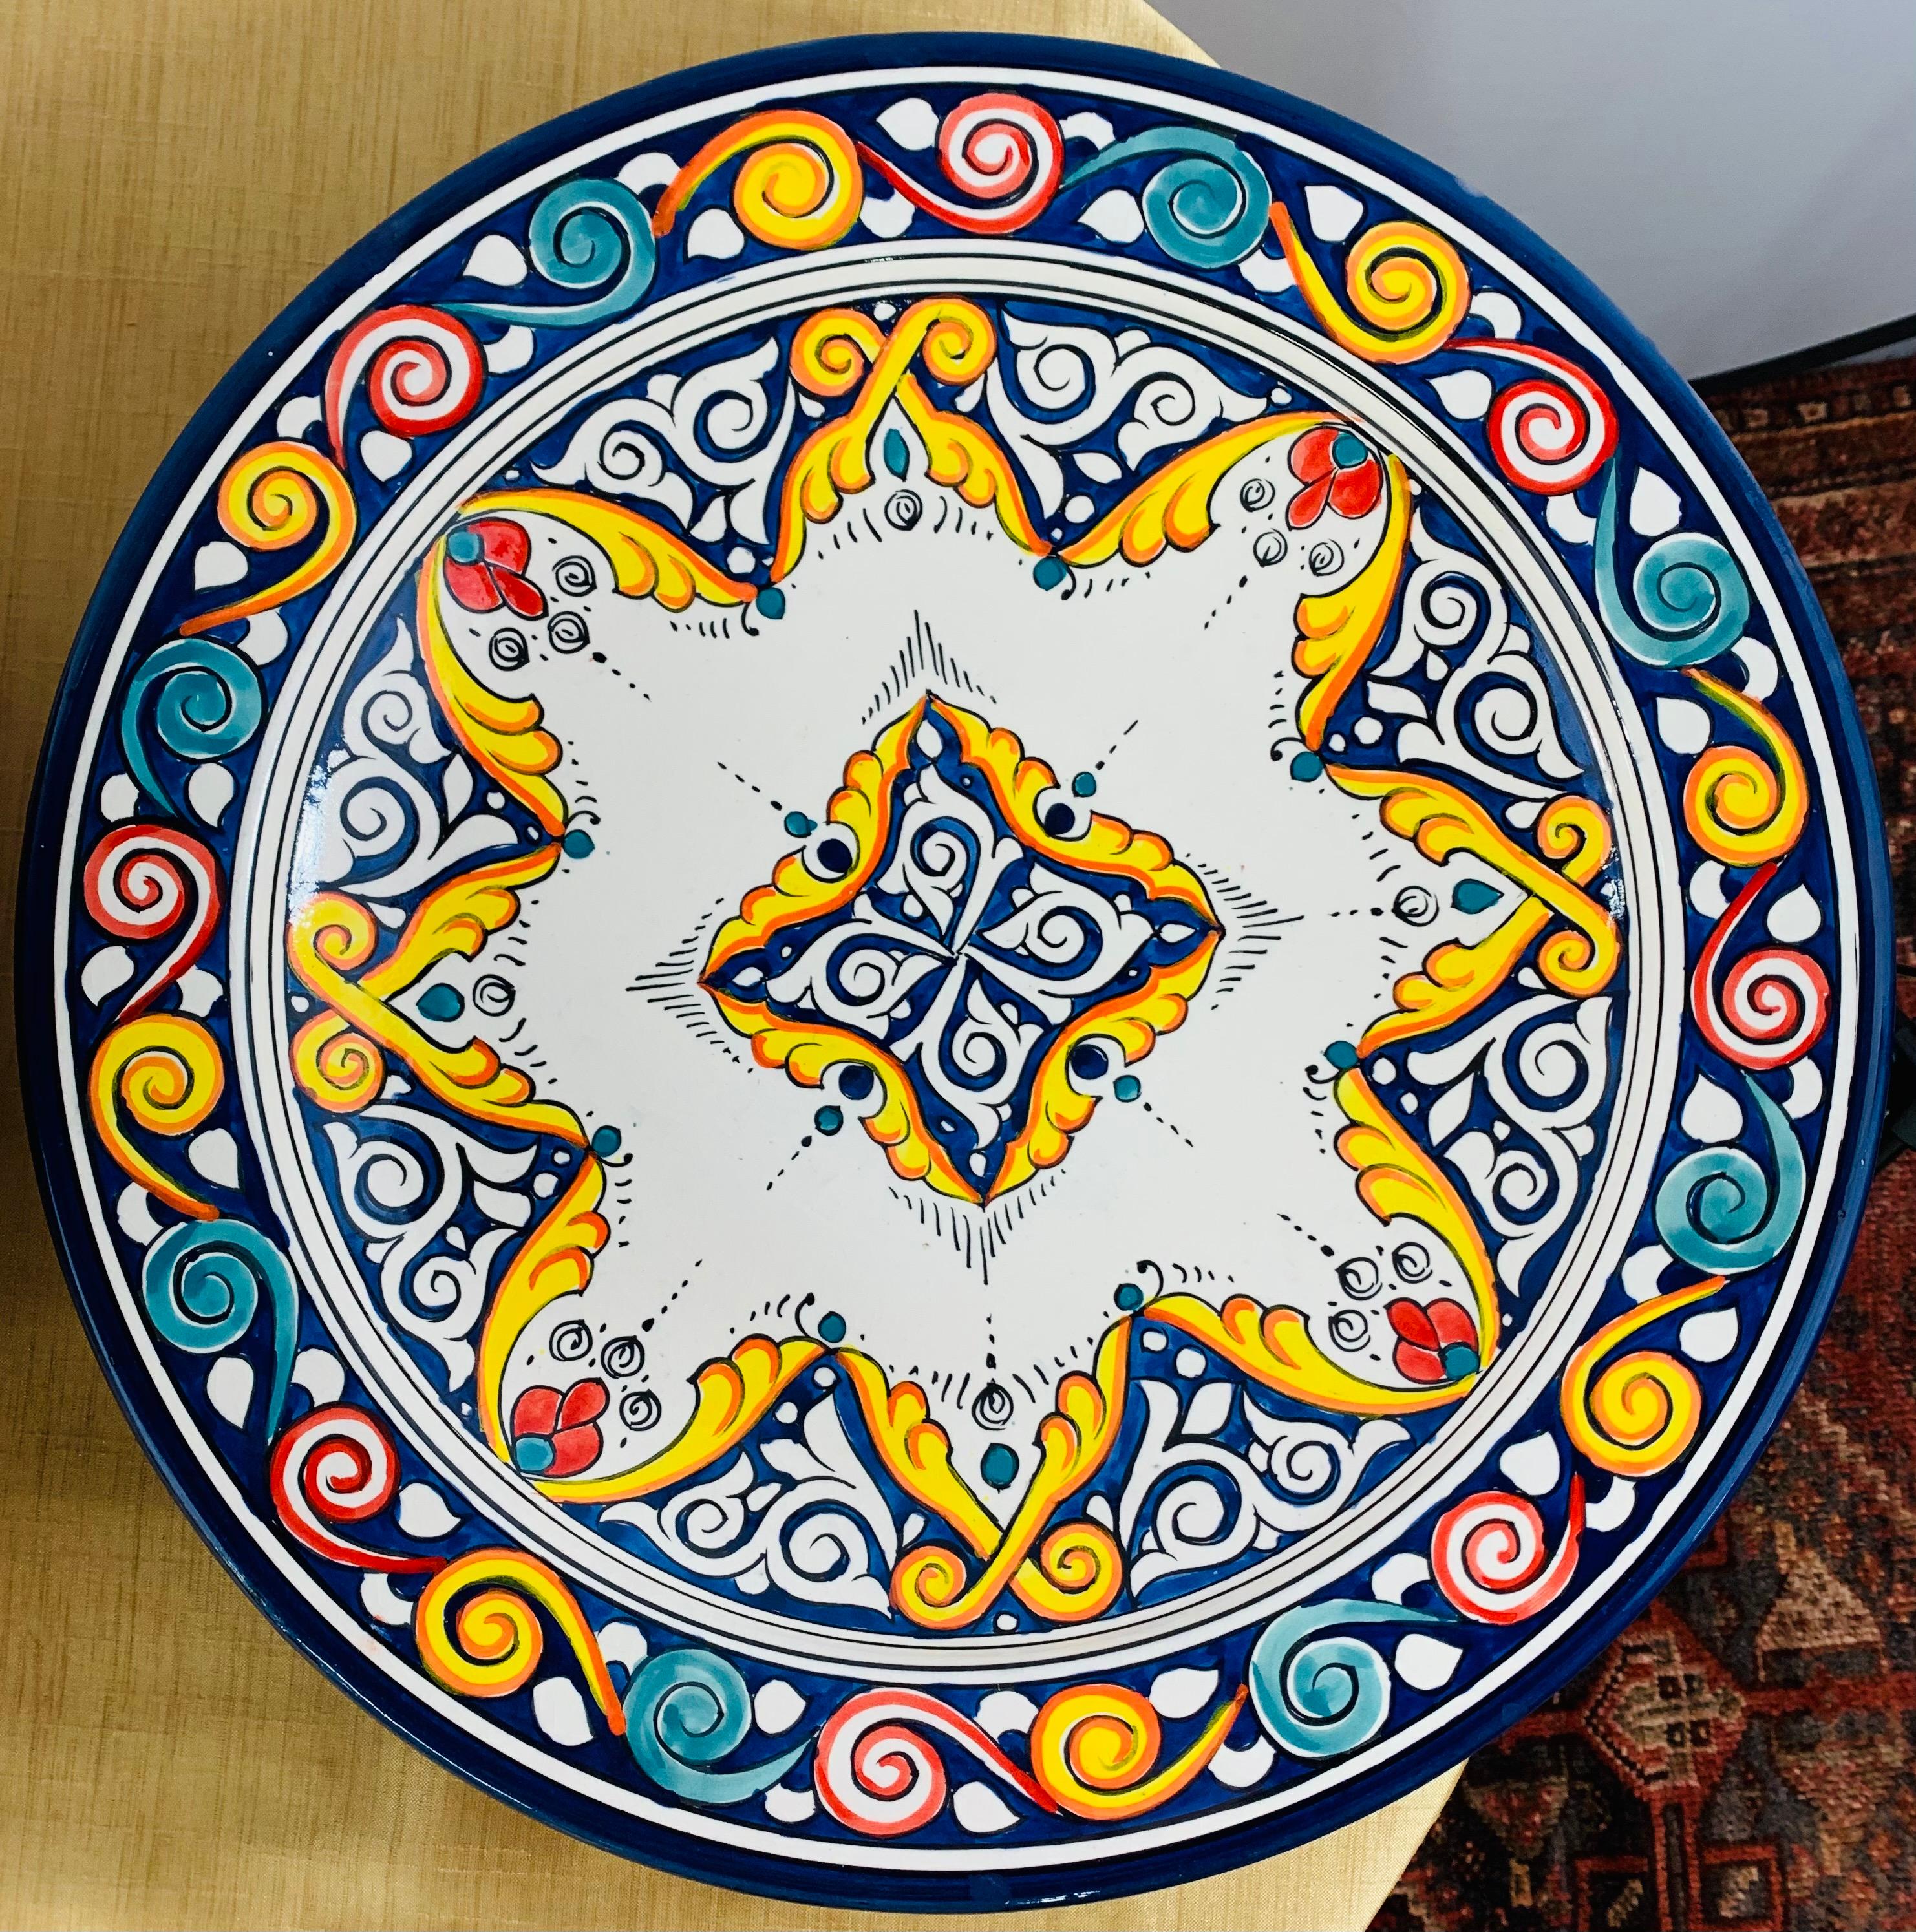 Intricate and ornate arabesque motifs in mesmerizing colors define these large, gorgeous ceramic dinner plates. Handcrafted in the bustling workshops of master artisans in the coastal city of Safi, these lovely plates can be wall-mounted as